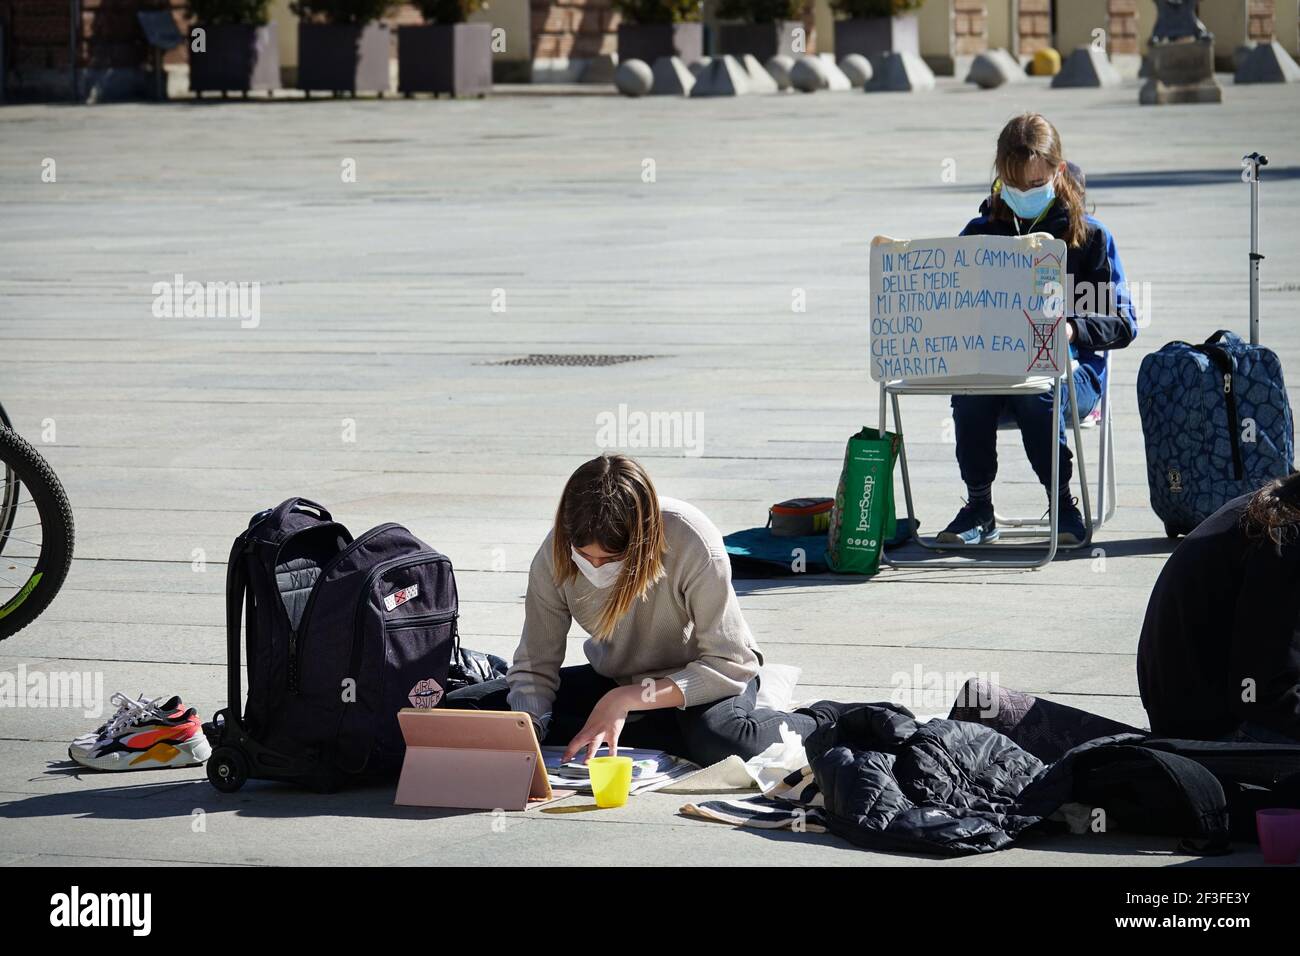 Italian student takes distance learning class on street in protest of Covid school closure  Turin, Italy - March 2021 Stock Photo